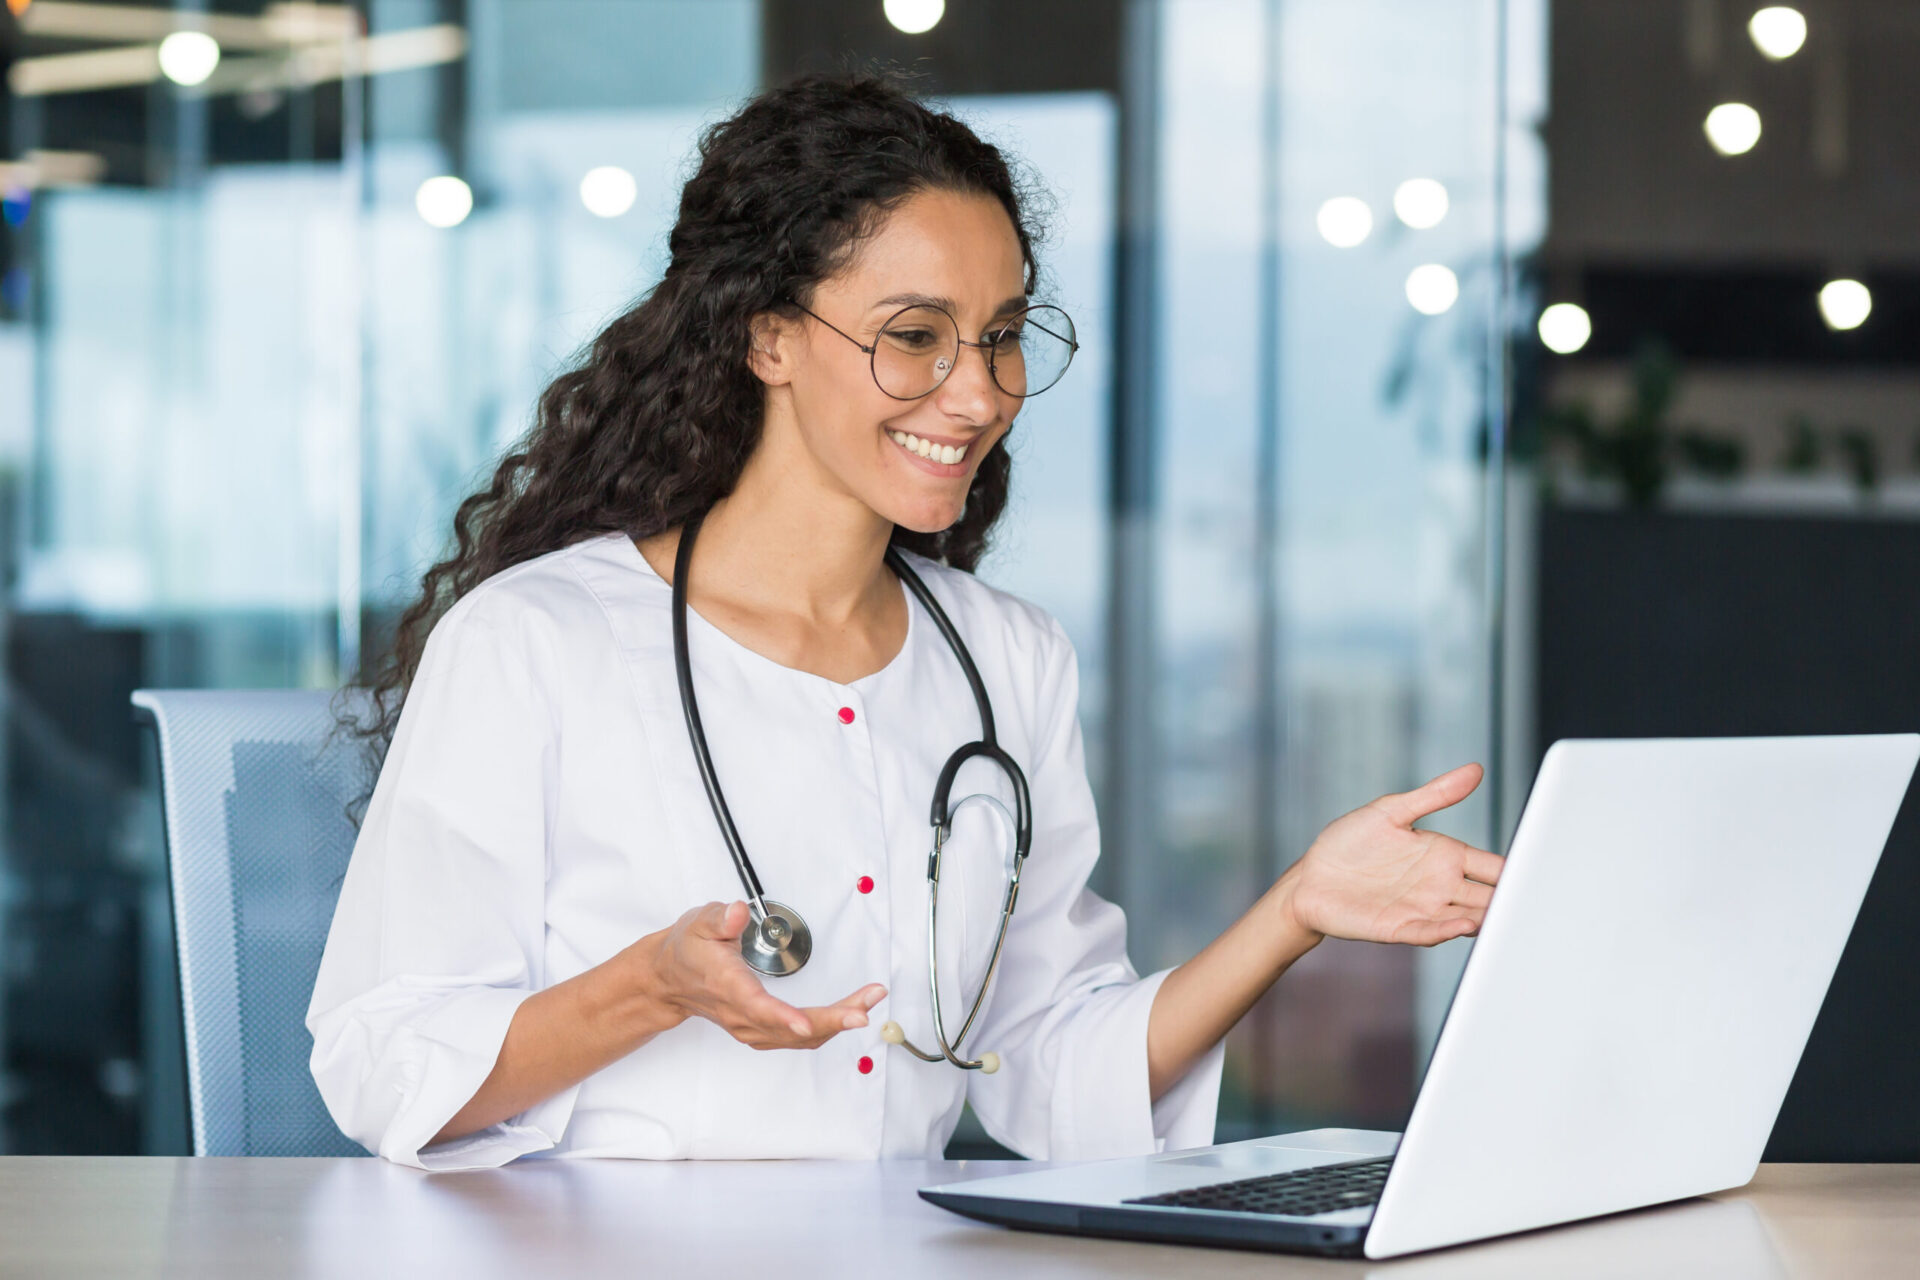 Online consultation of a Latin American doctor with curly hair and glasses, the doctor works inside the office of the clinic, uses a laptop to consult patients remotely